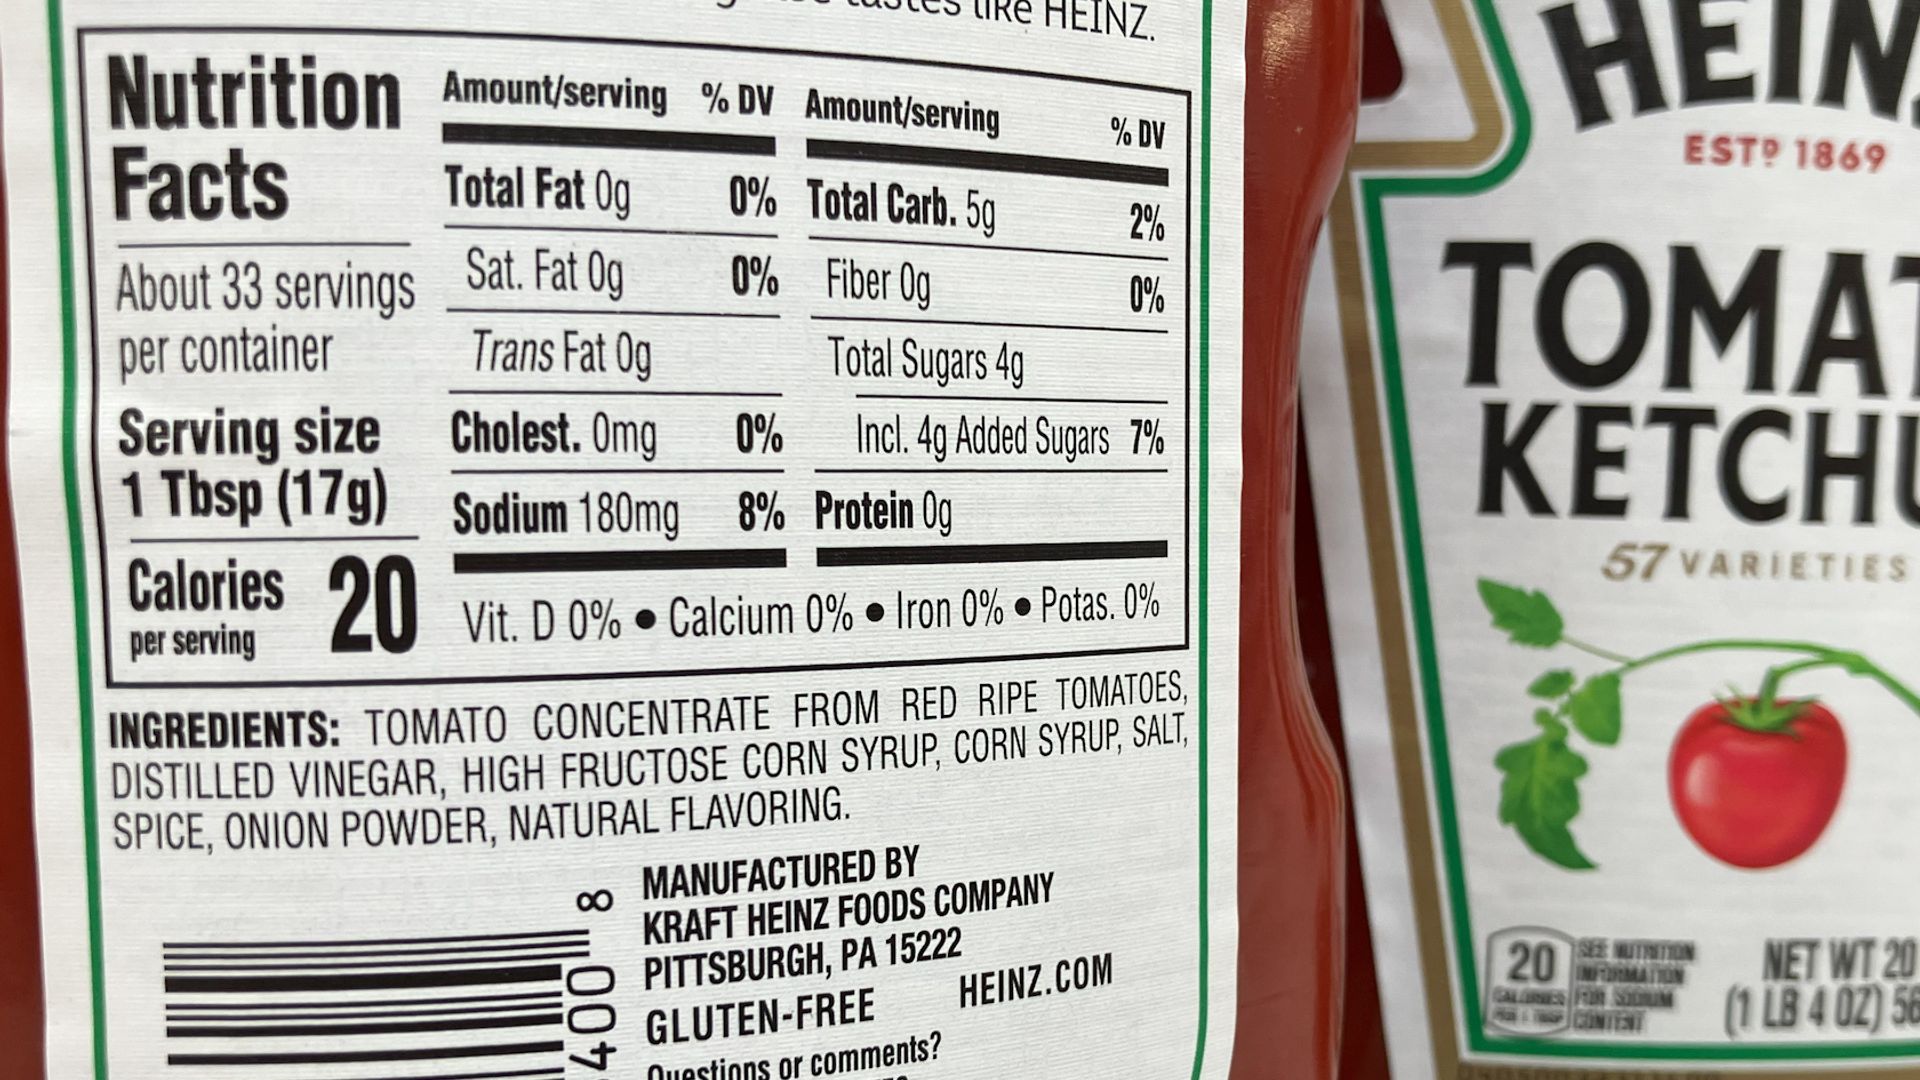 Rep. Luna, R-Fla., wants to ban high fructose corn syrup and three out of the nine FDA approved color additives.